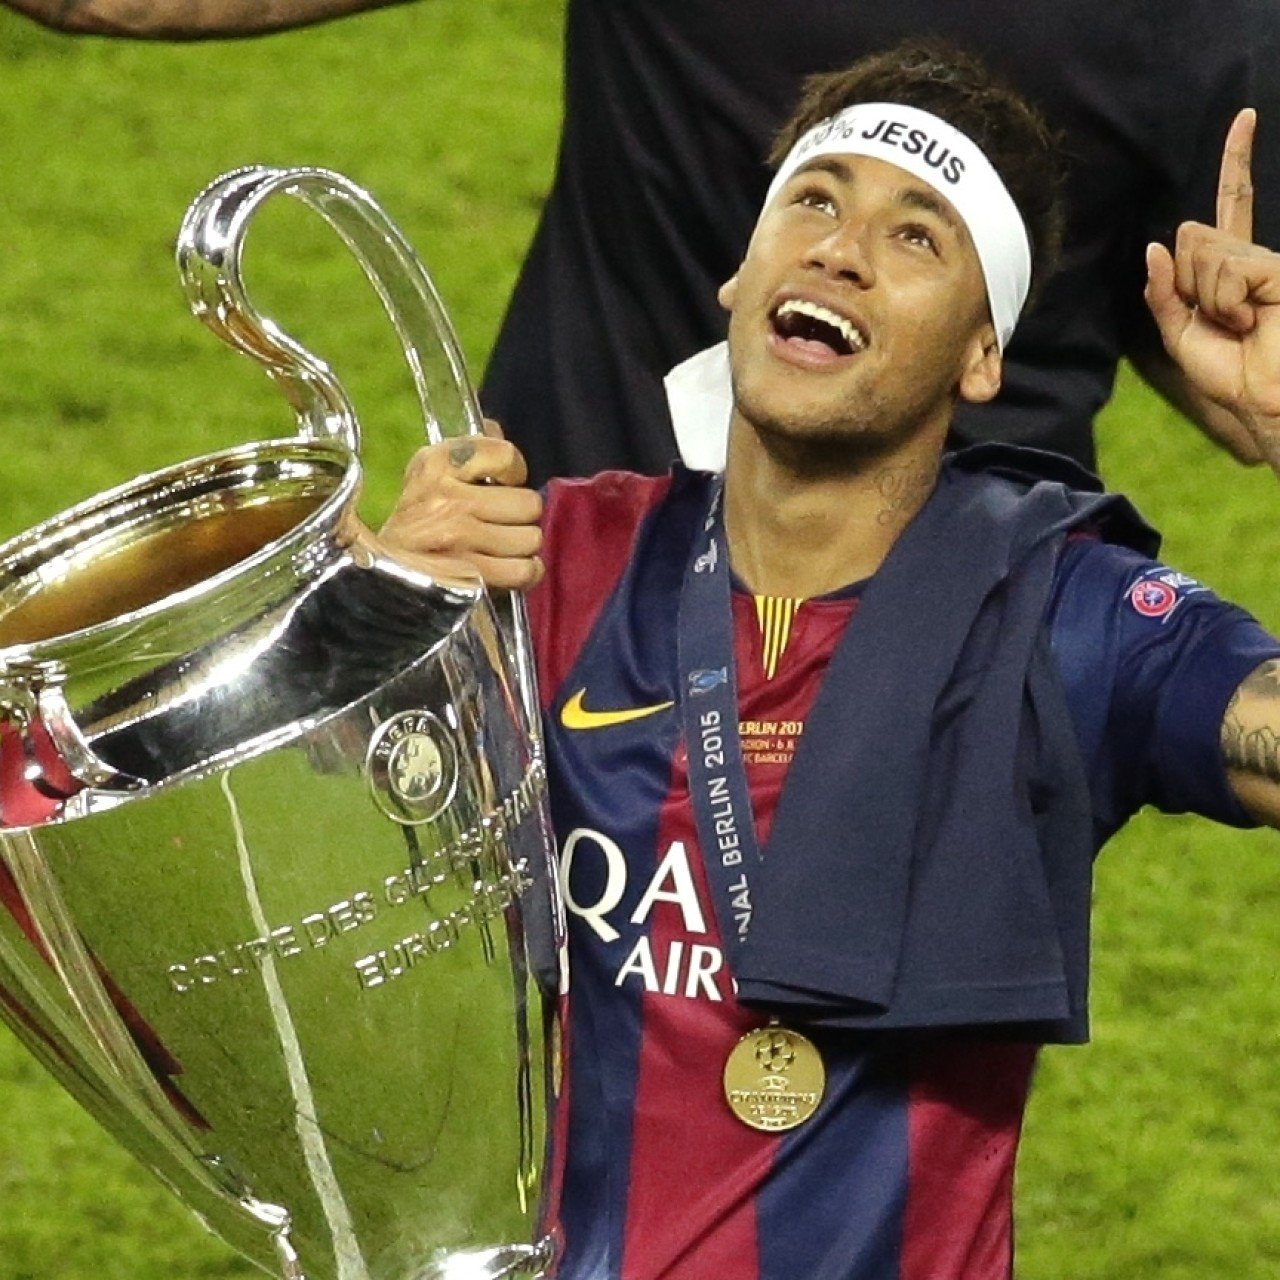 Dream Team - This was Neymar Jr.'s best moment of the UEFA